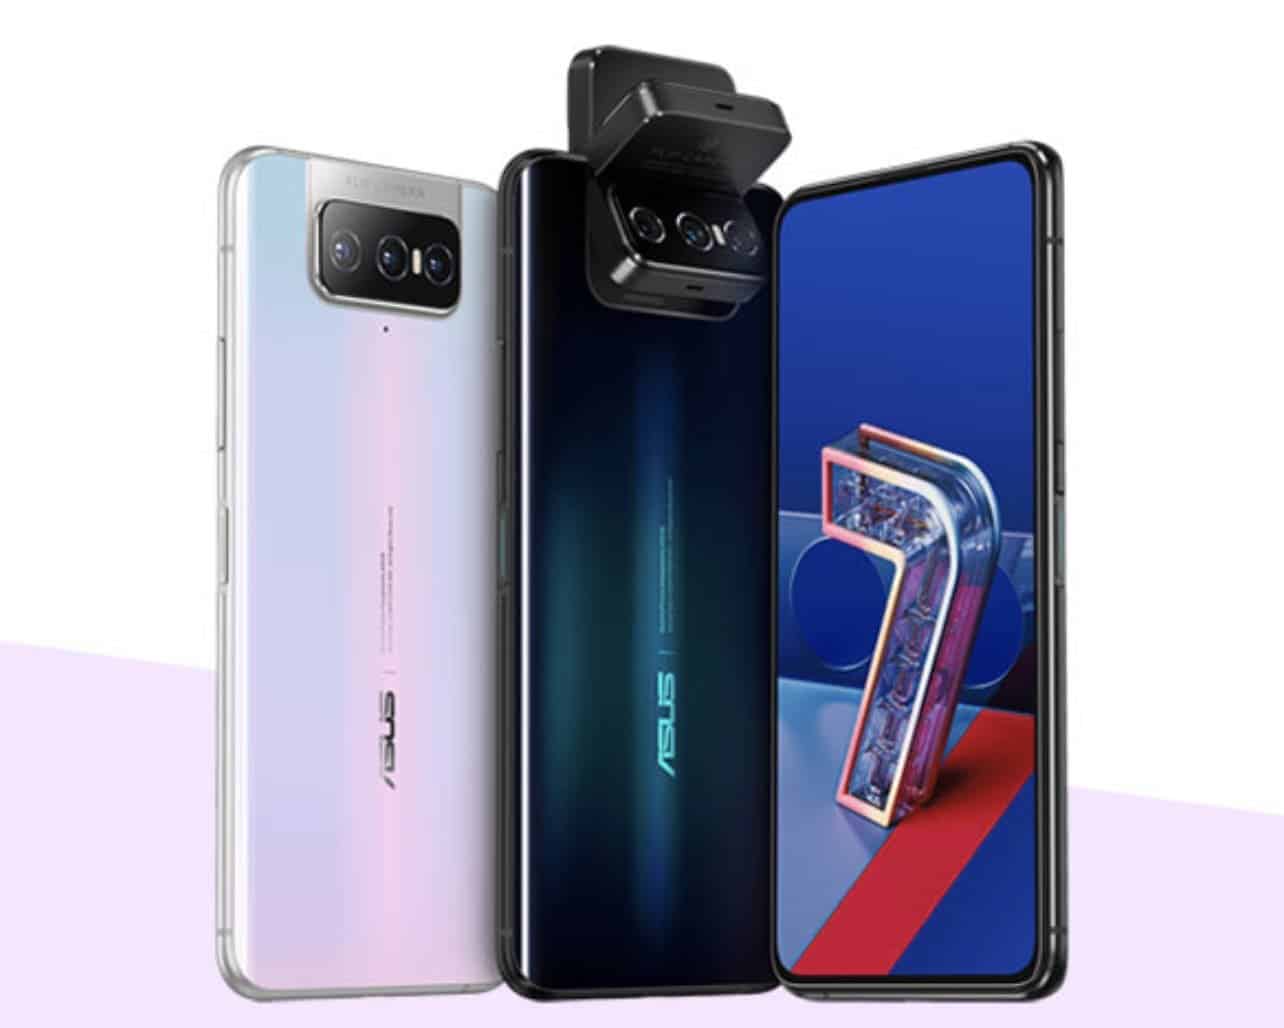 Asus ZenFone 7 and 7 pro